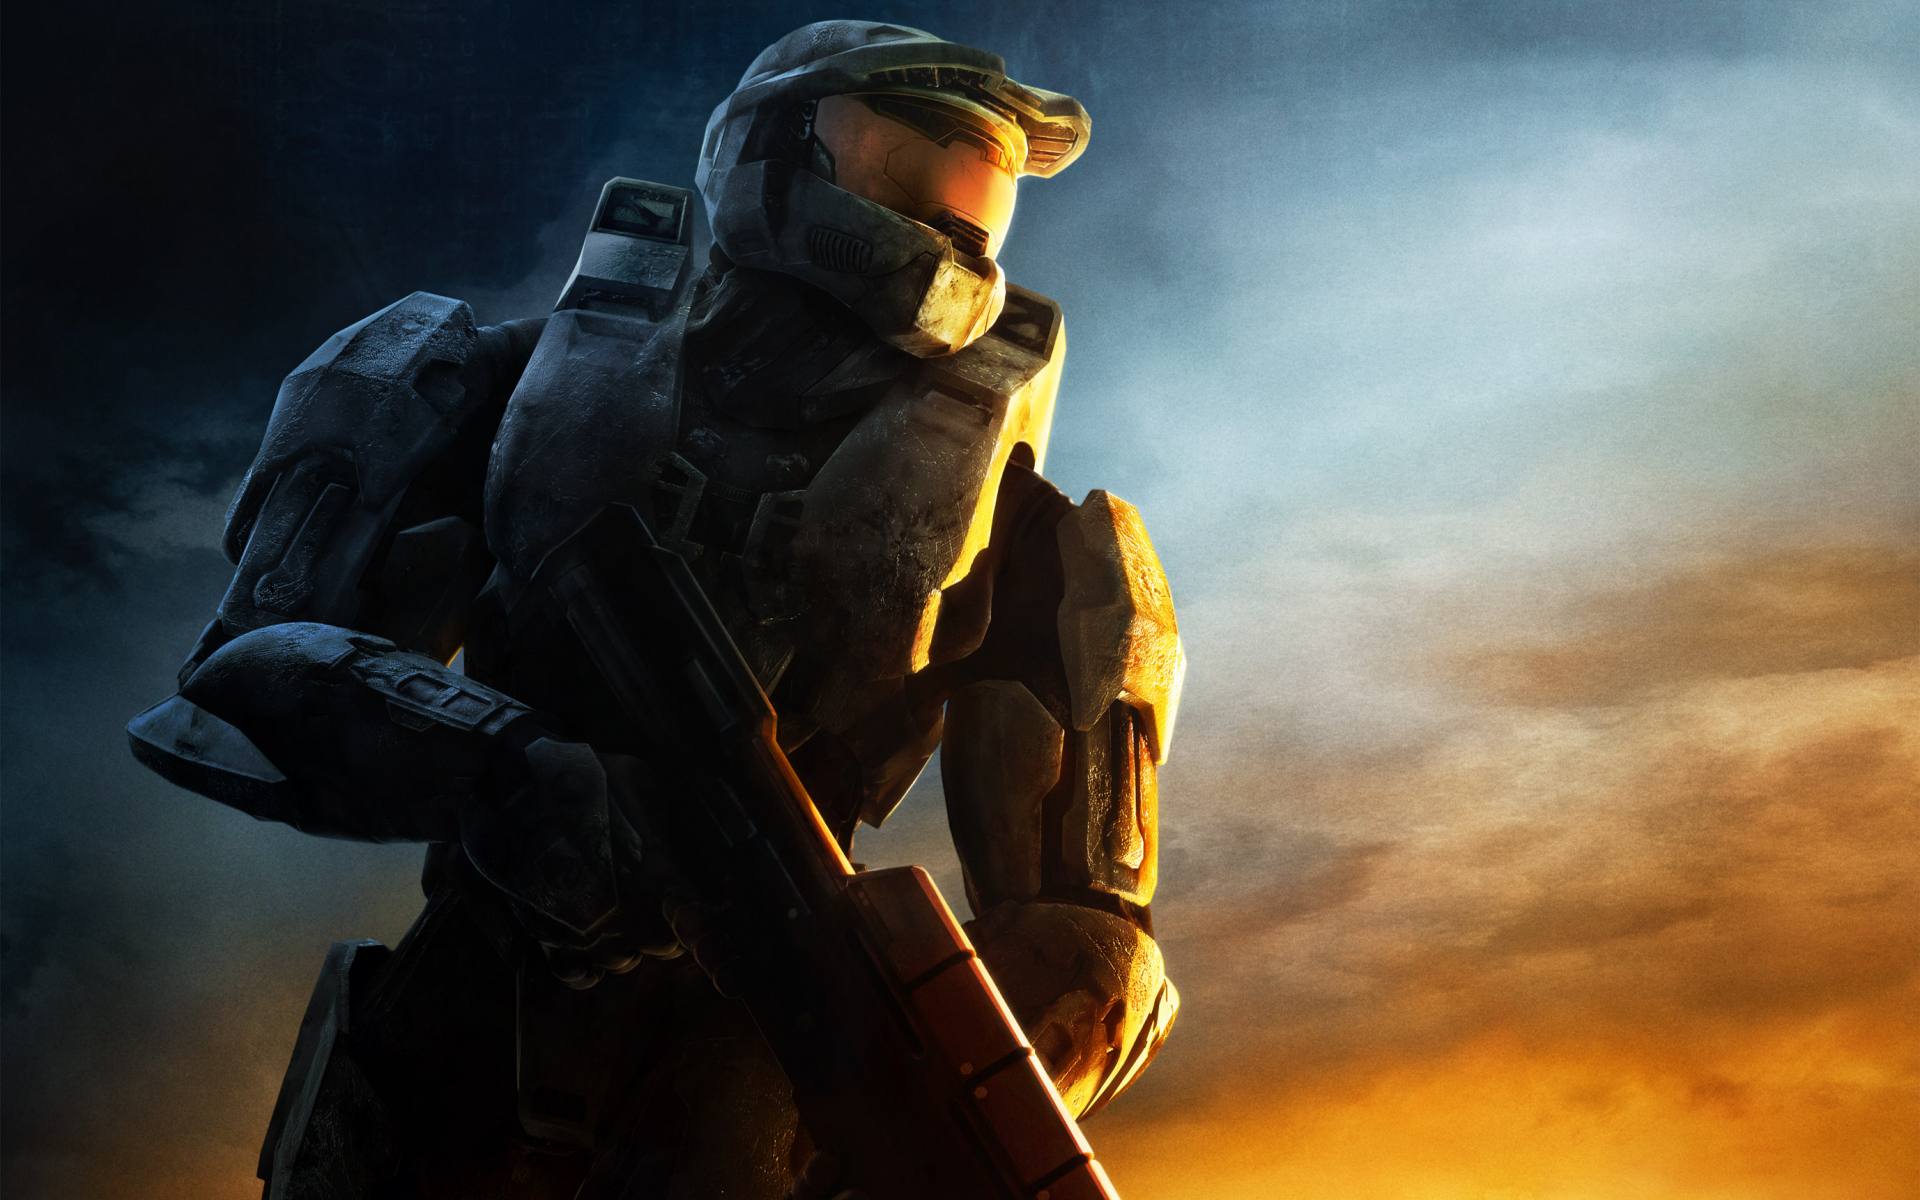 Halo 3 screenshots, images and pictures - Giant Bomb